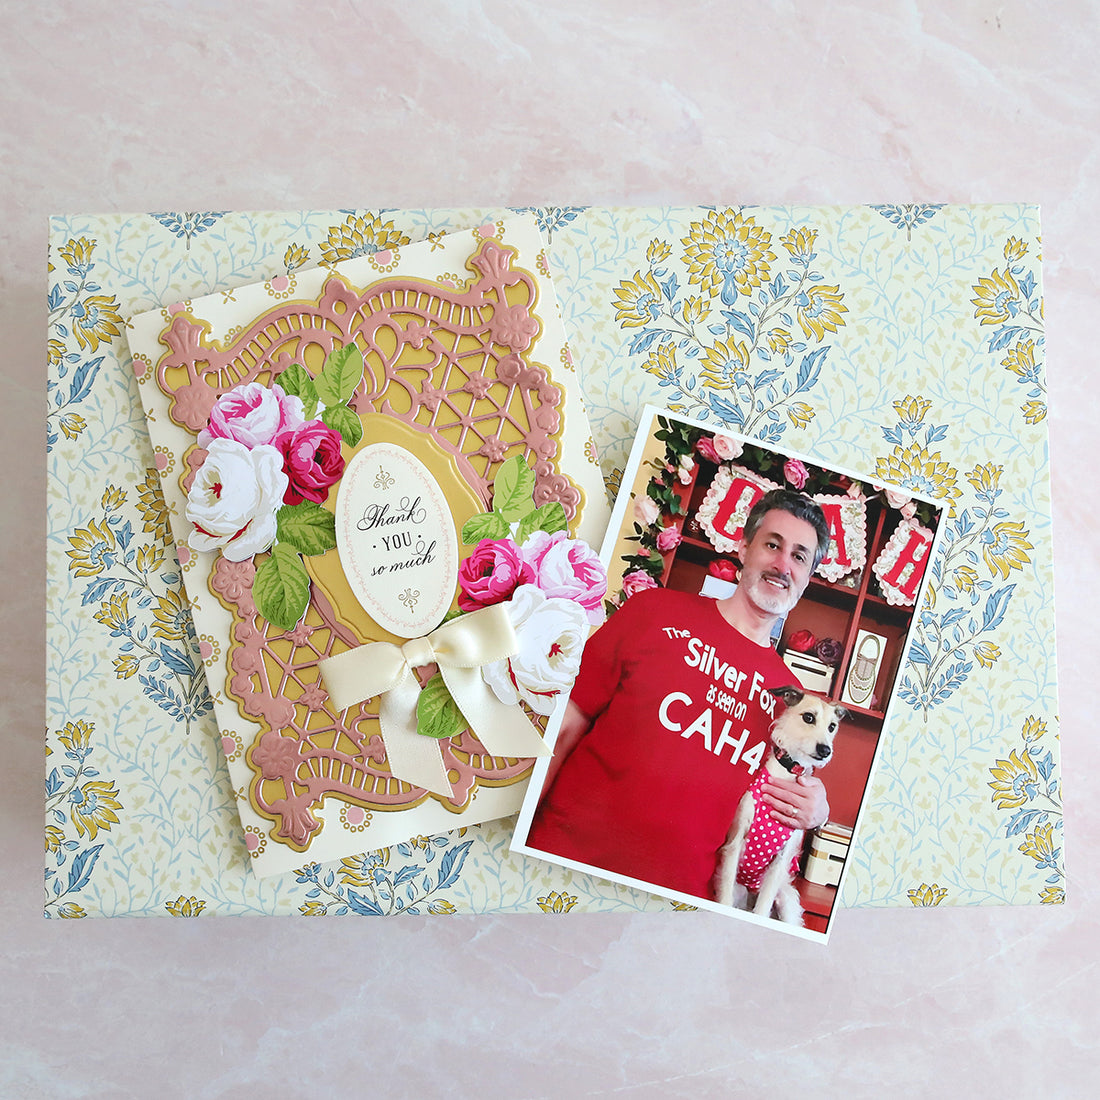 a patterned box, card and photo of CAH4 guest's husband